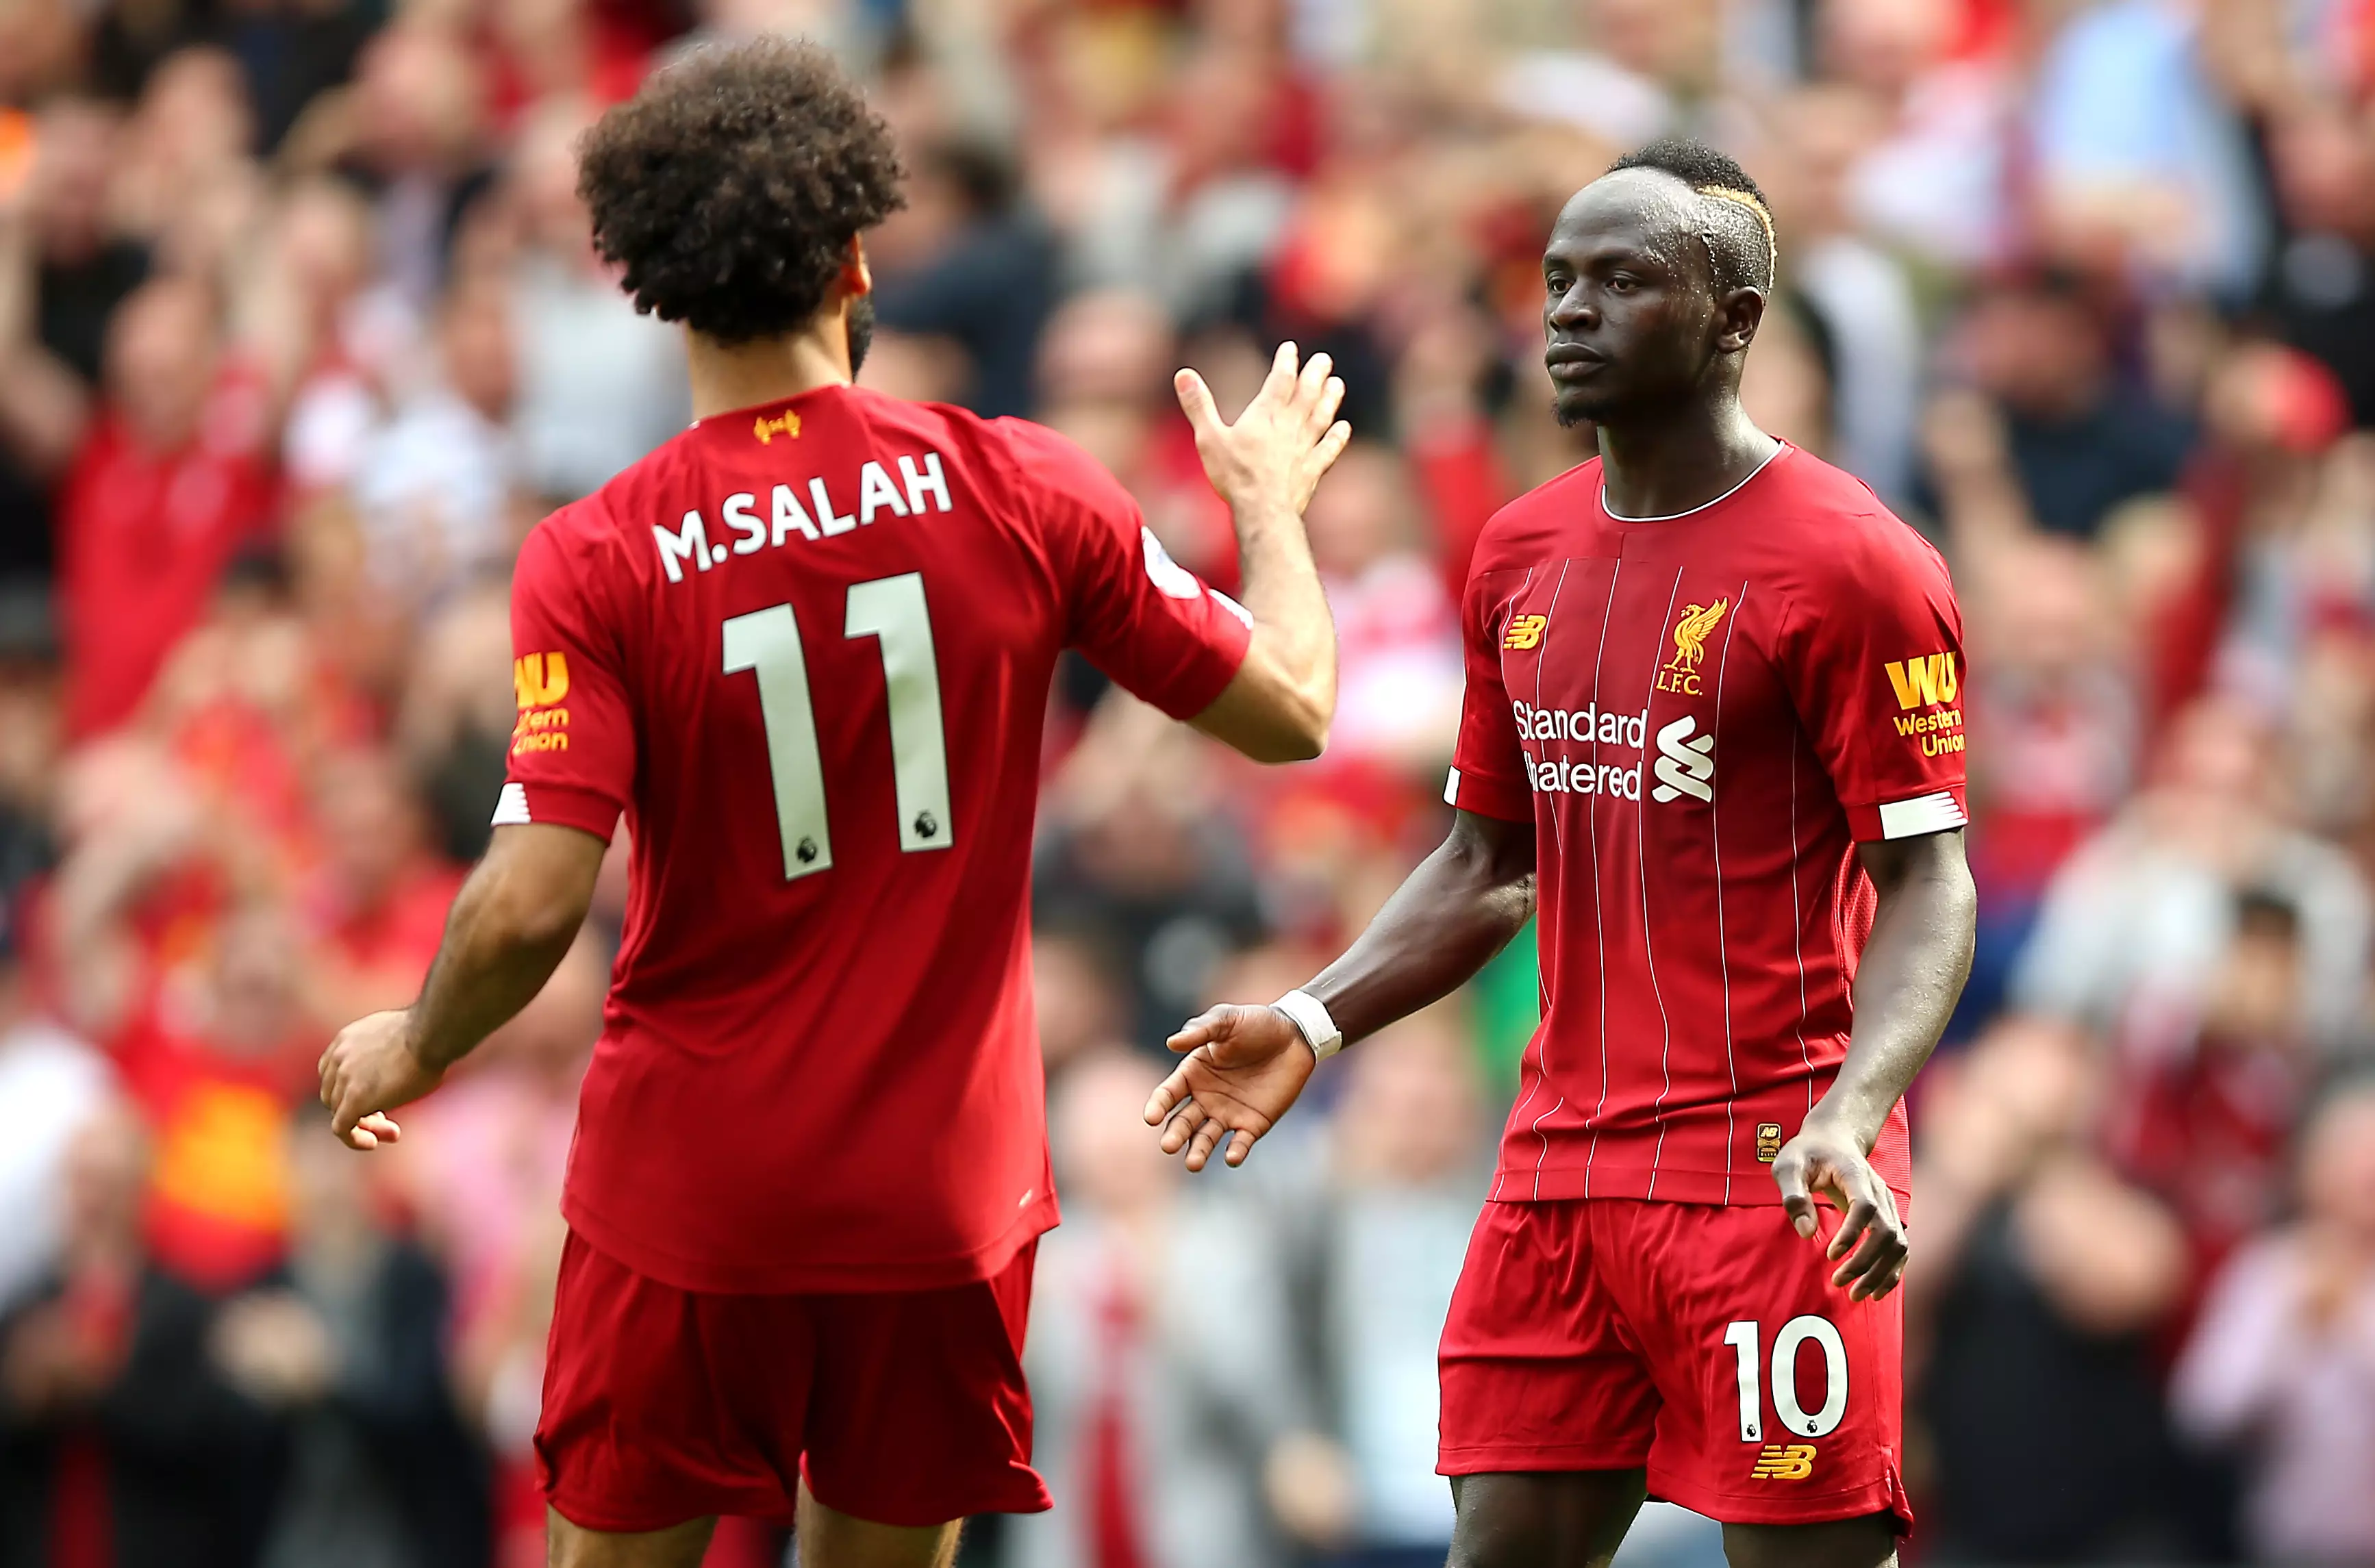 Sadio Mane was including in the team of the year, but not Mo Salah